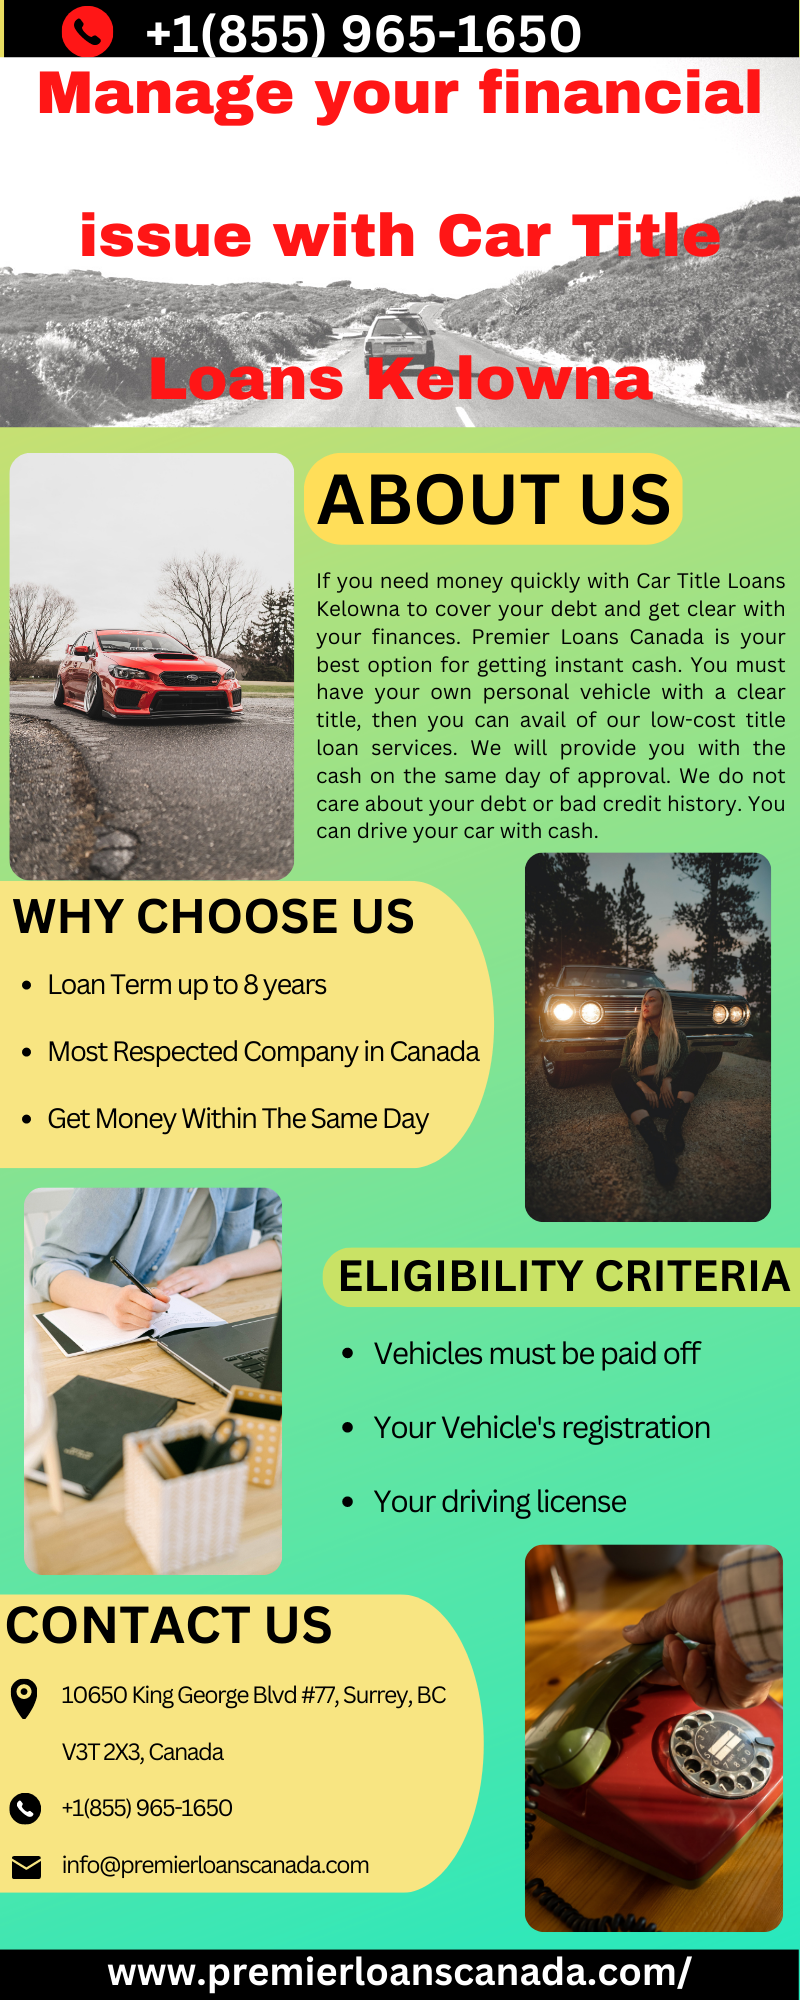 Manage your financial issue with Car Title Loans Kelowna at the same day of approval